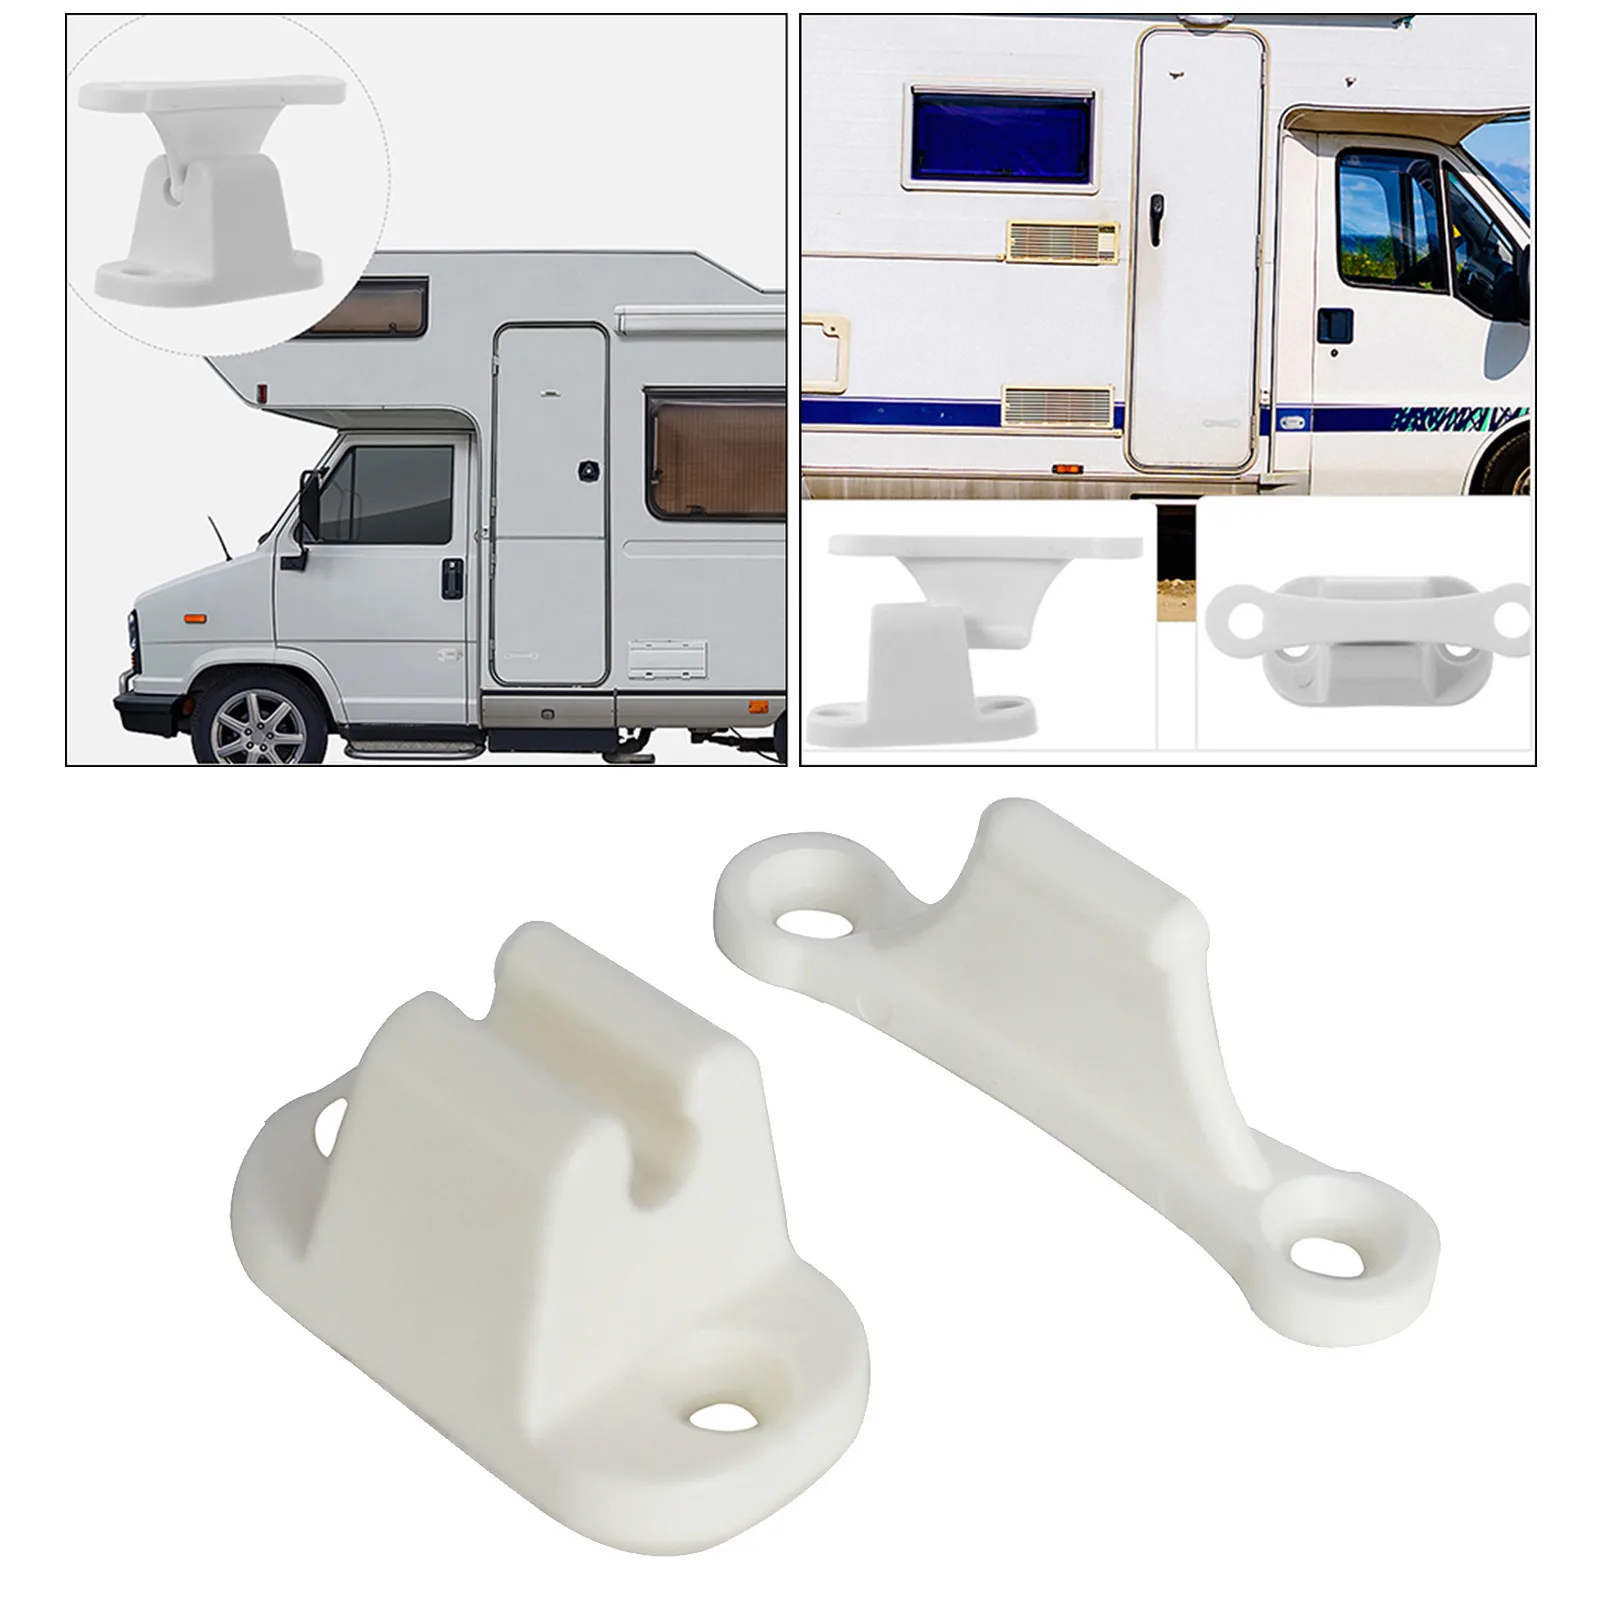 1 Pcs Car Caravan Or Motorhome White Plastic Main Door Catch Retainer Holder CDR7 Caravan Accessories Door Retainer Catches led zeppelin in through the out door complete outtakes and rehearsals0 ltd 111 white num